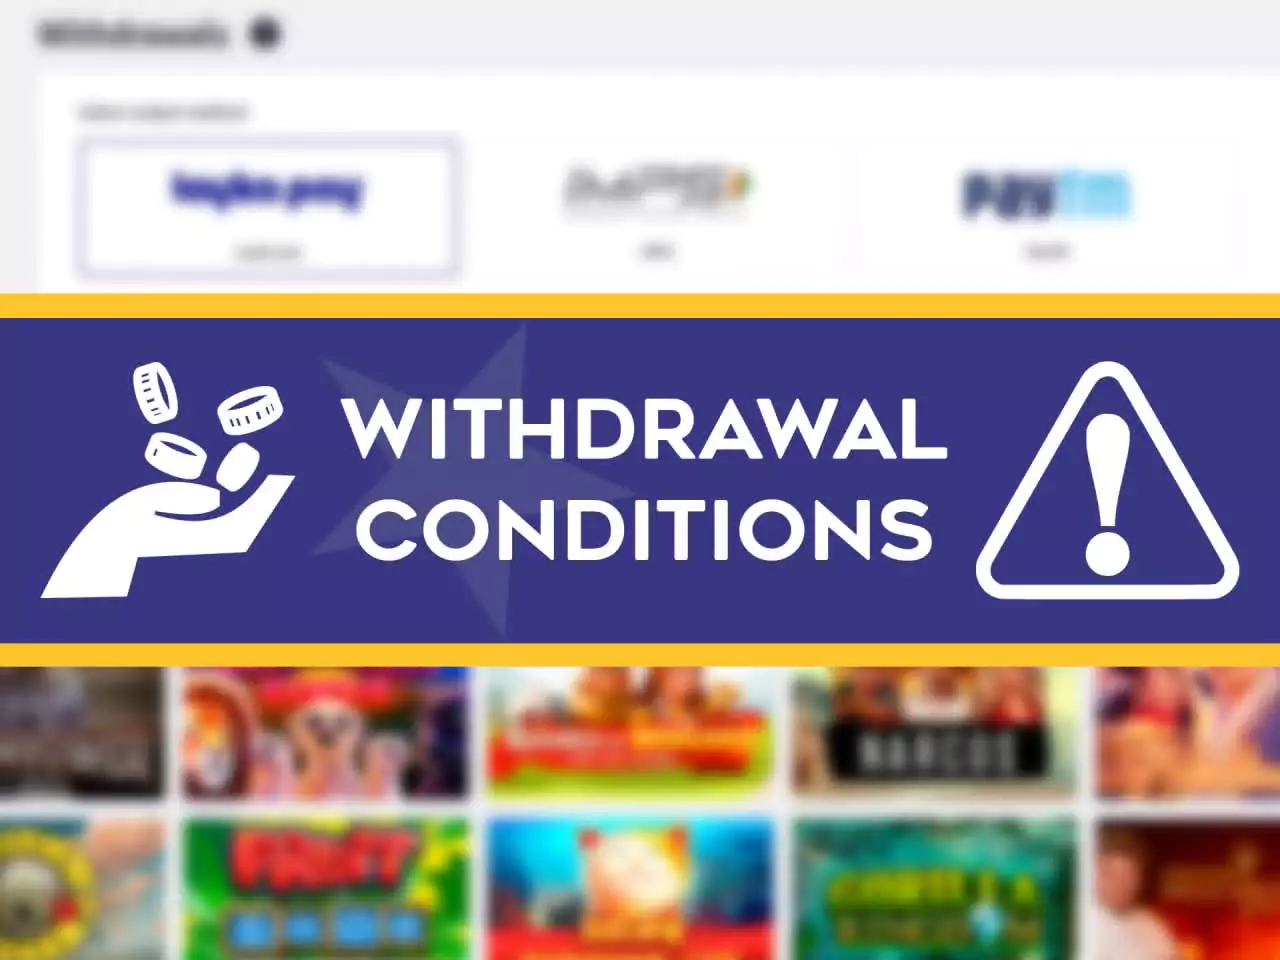 Learn all the conditions to withdraw money with no problems.